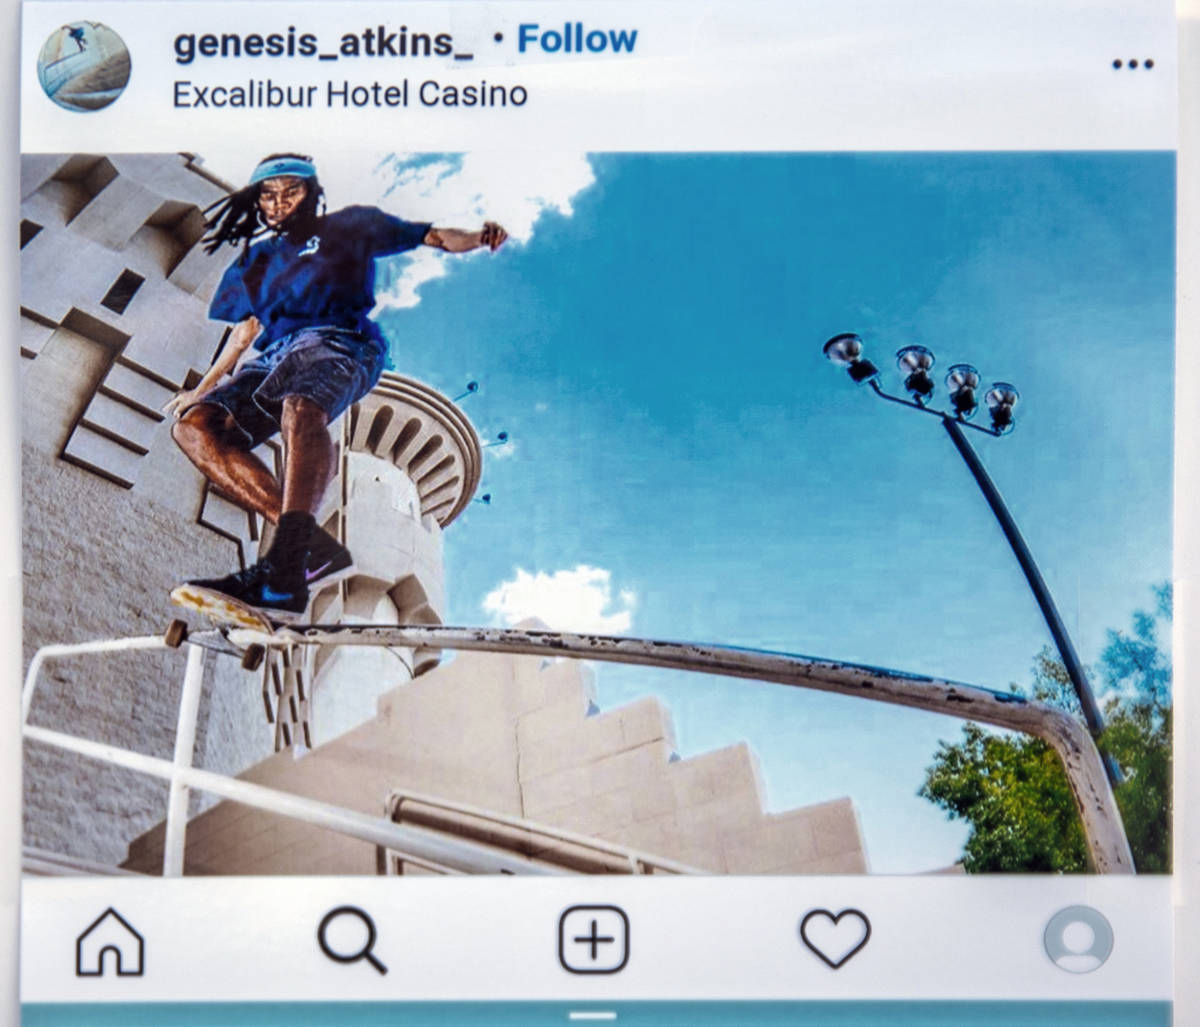 Instagram page image of Genesis Atkins, a motorcyclist who was killed Sunday evening when struc ...